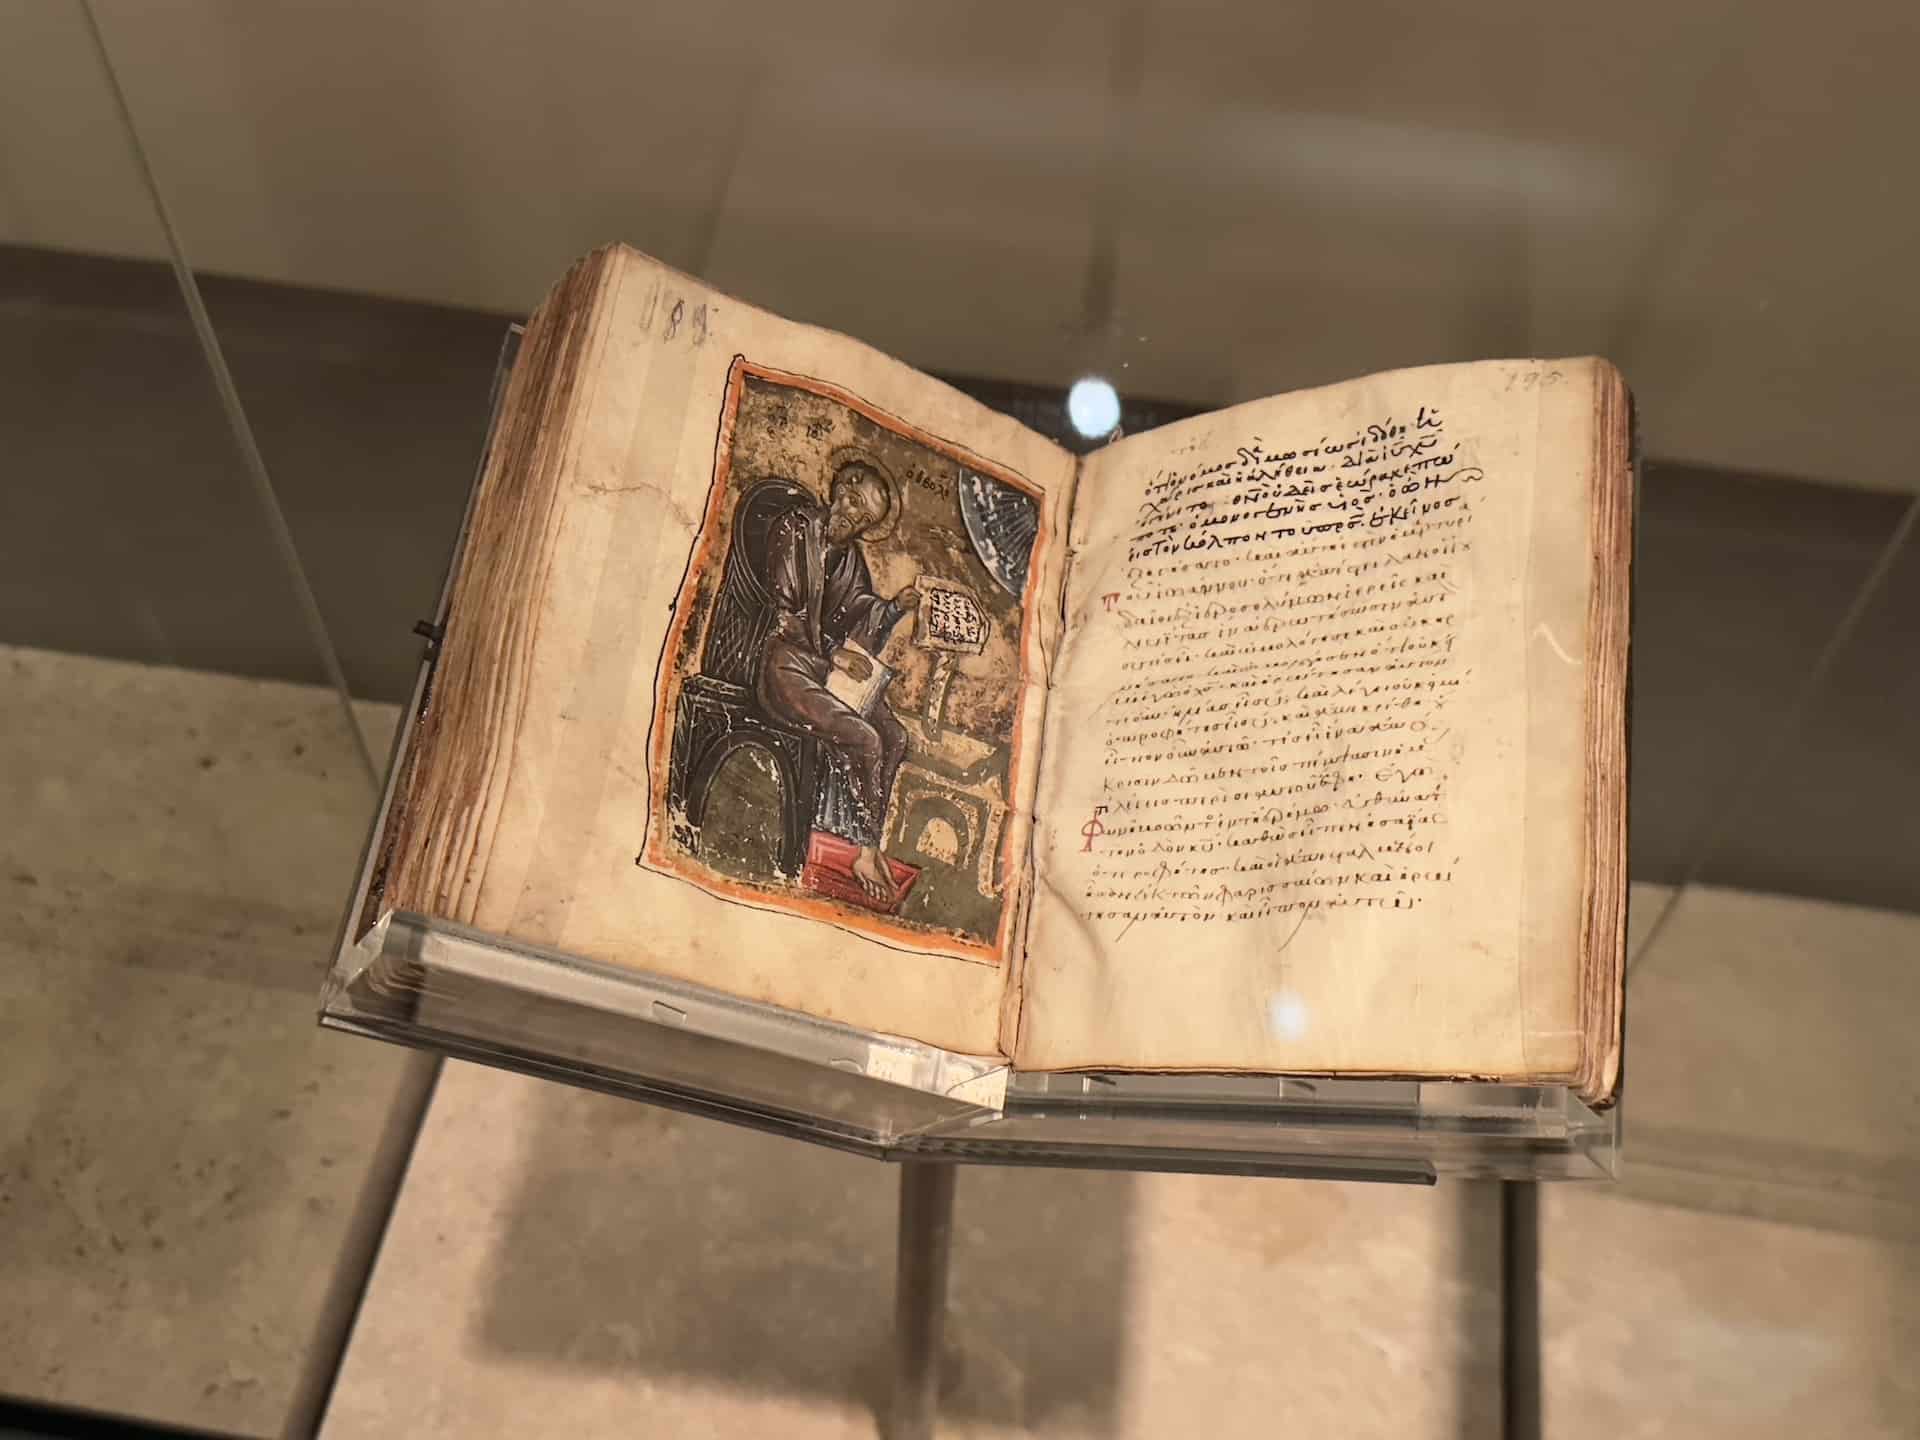 Parchment manuscript Book of Gospels, 12th century at the Byzantine Museum in Athens, Greece